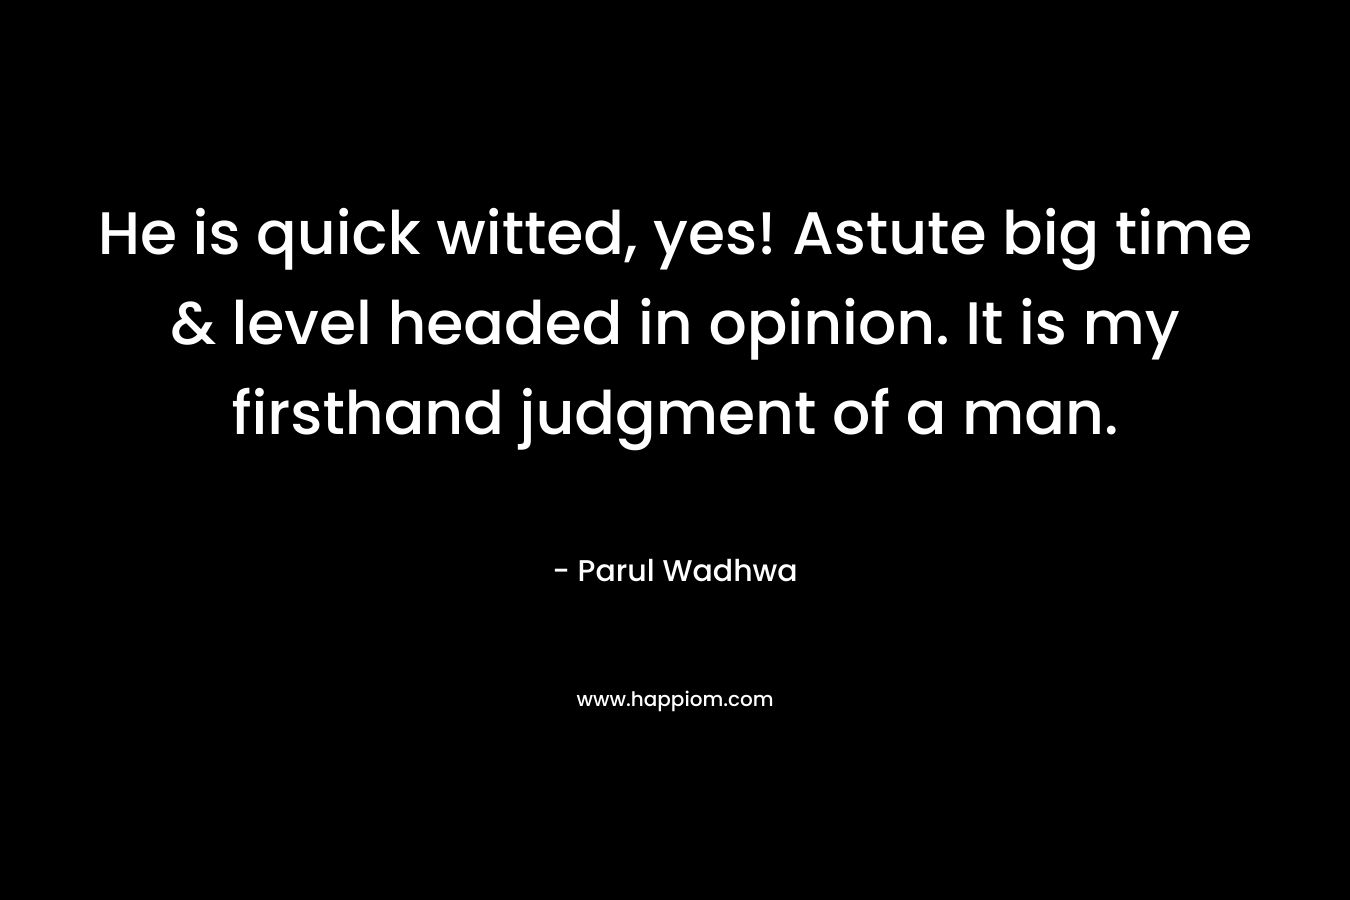 He is quick witted, yes! Astute big time & level headed in opinion. It is my firsthand judgment of a man. – Parul Wadhwa